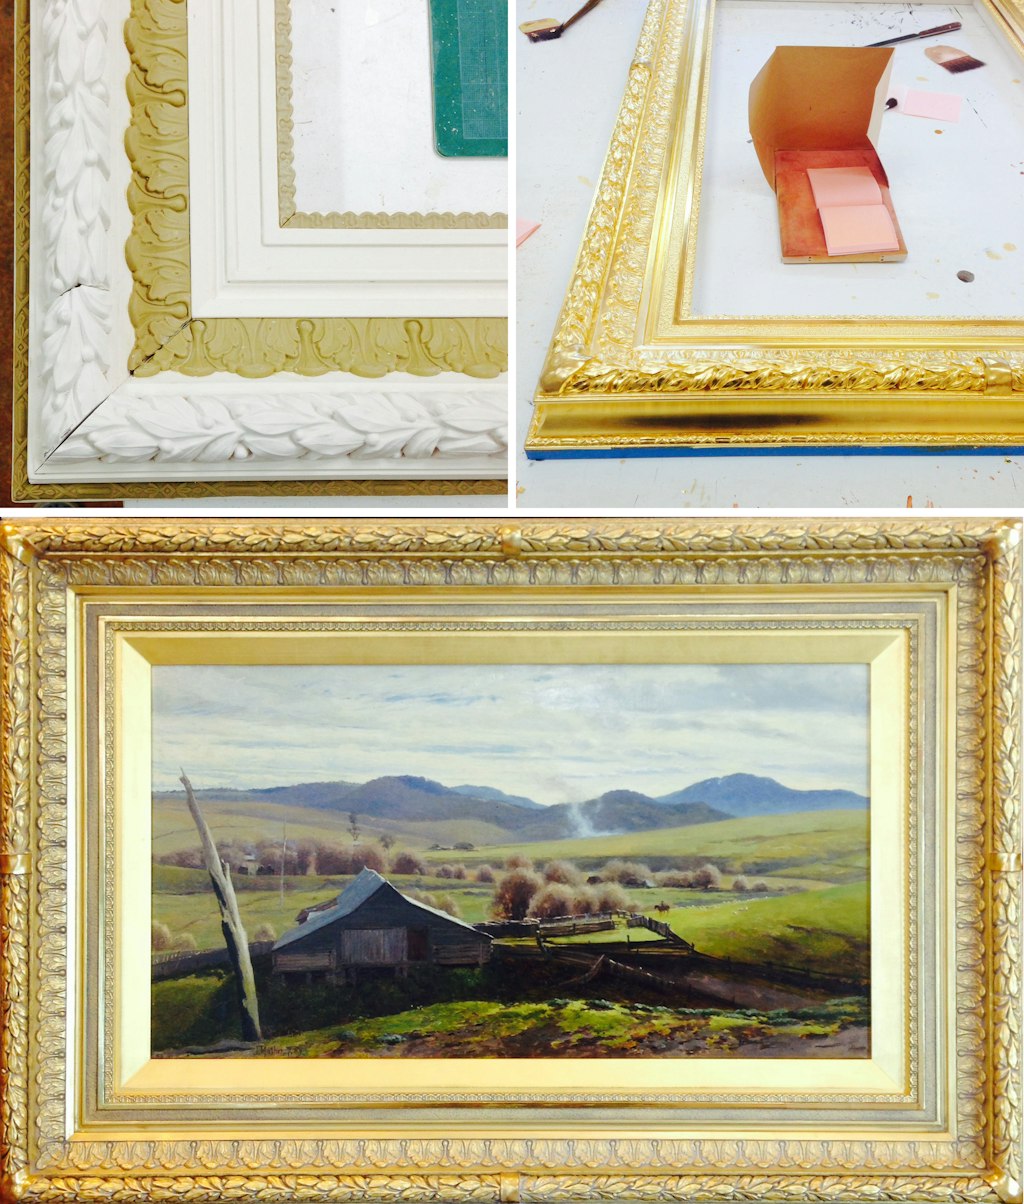 Frame in progress for John Mather's ??A woolshed, Victoria?? (clockwise from top left): composition ornaments; immediately after gilding; finished frame